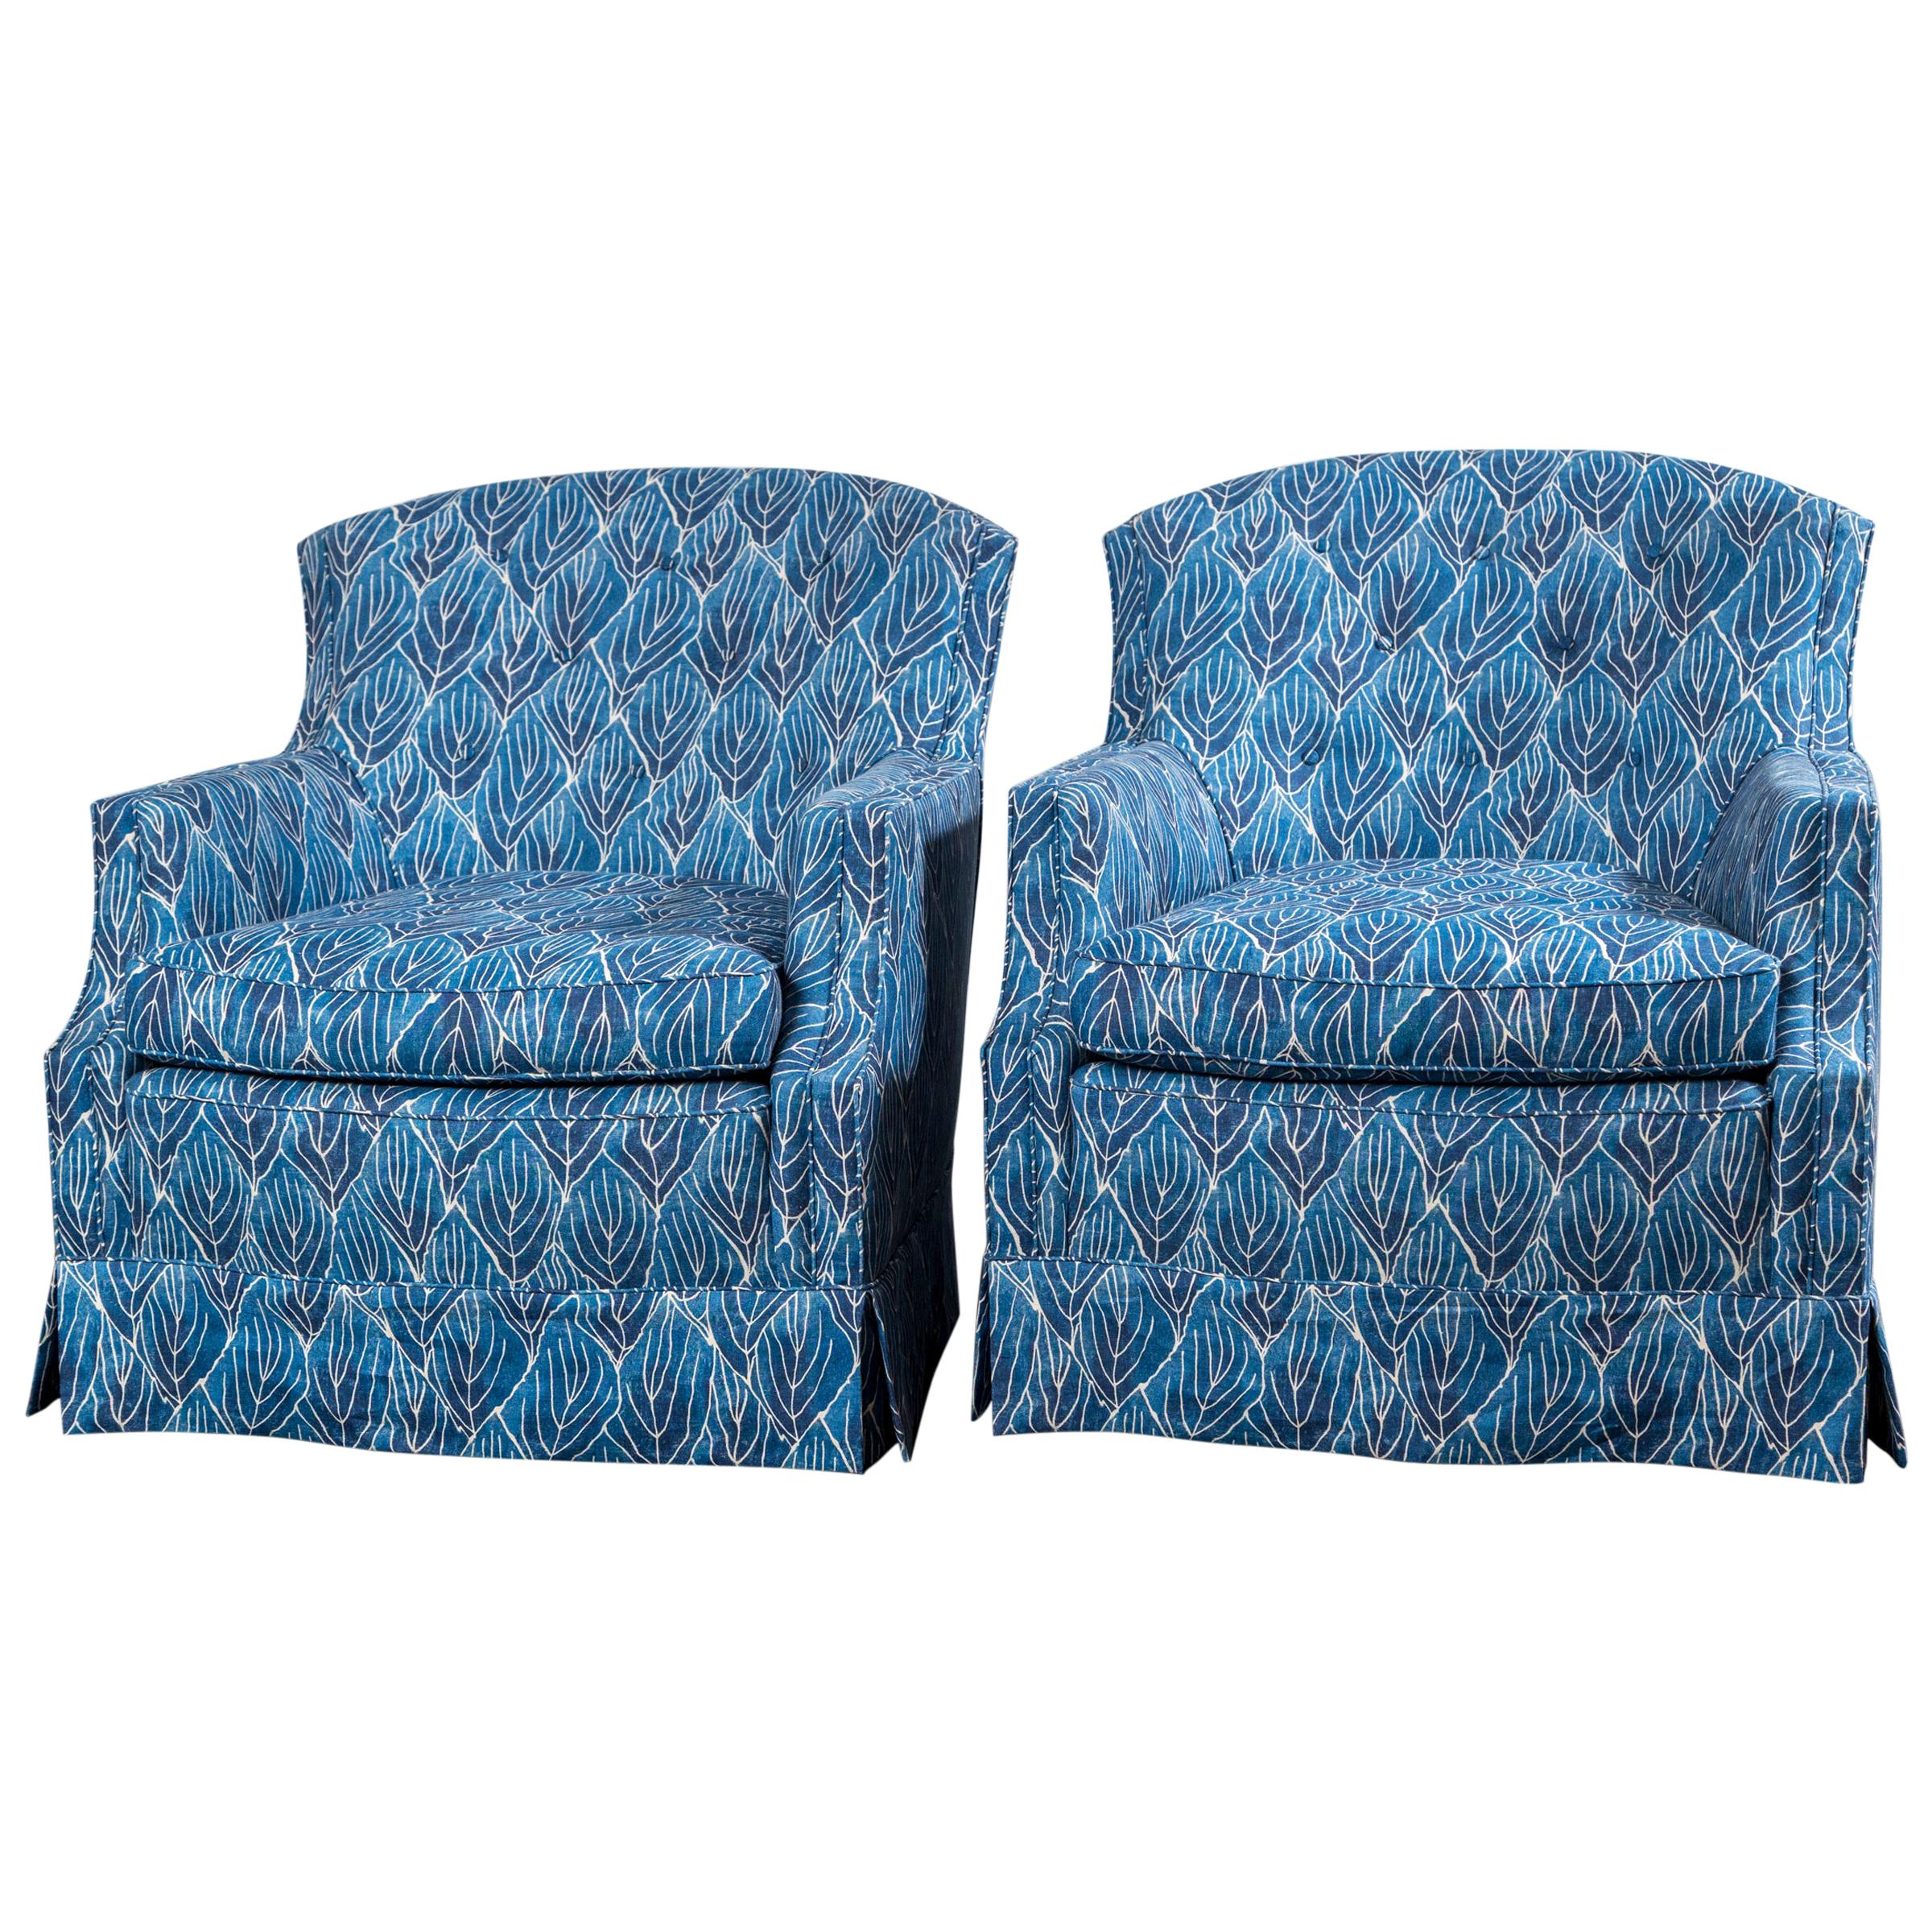 Pair of Vintage Blue Club Chairs, Newly Upholstered in Robert Kime Nara Fabric